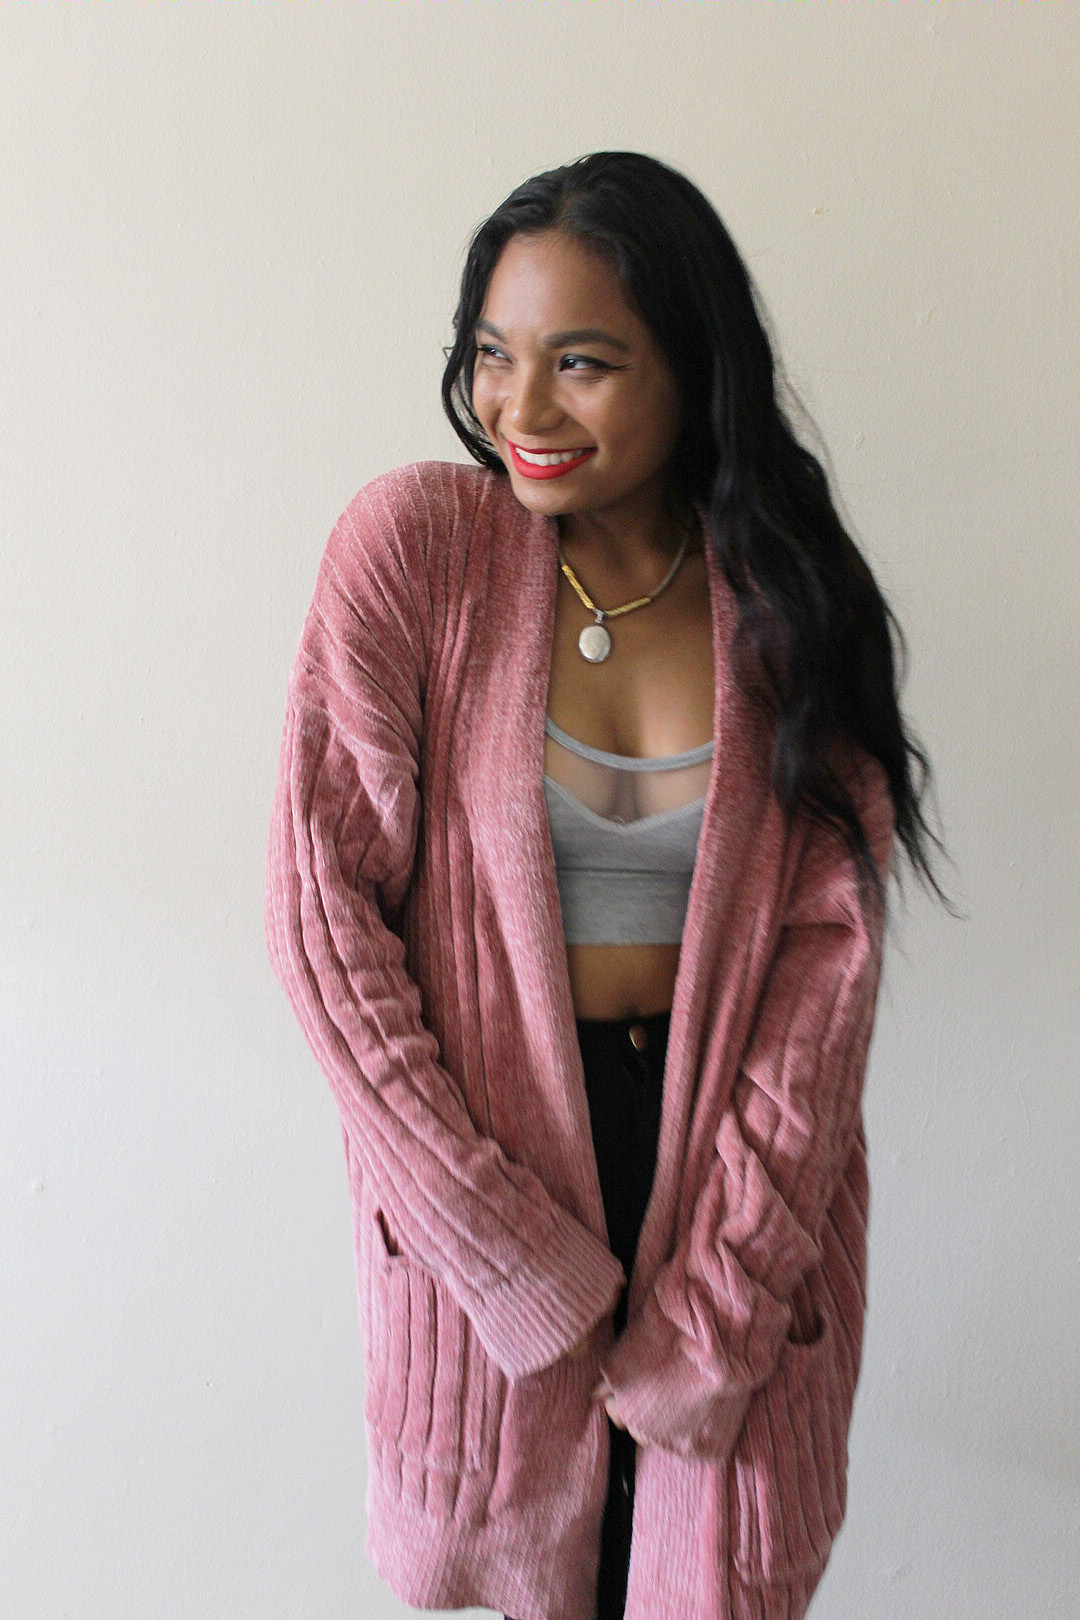 Cozy-Pink-Cardigan-for-the-Fall-Style-Blogger-Fashionista-LINDATENCHITRAN-1-1616x1080